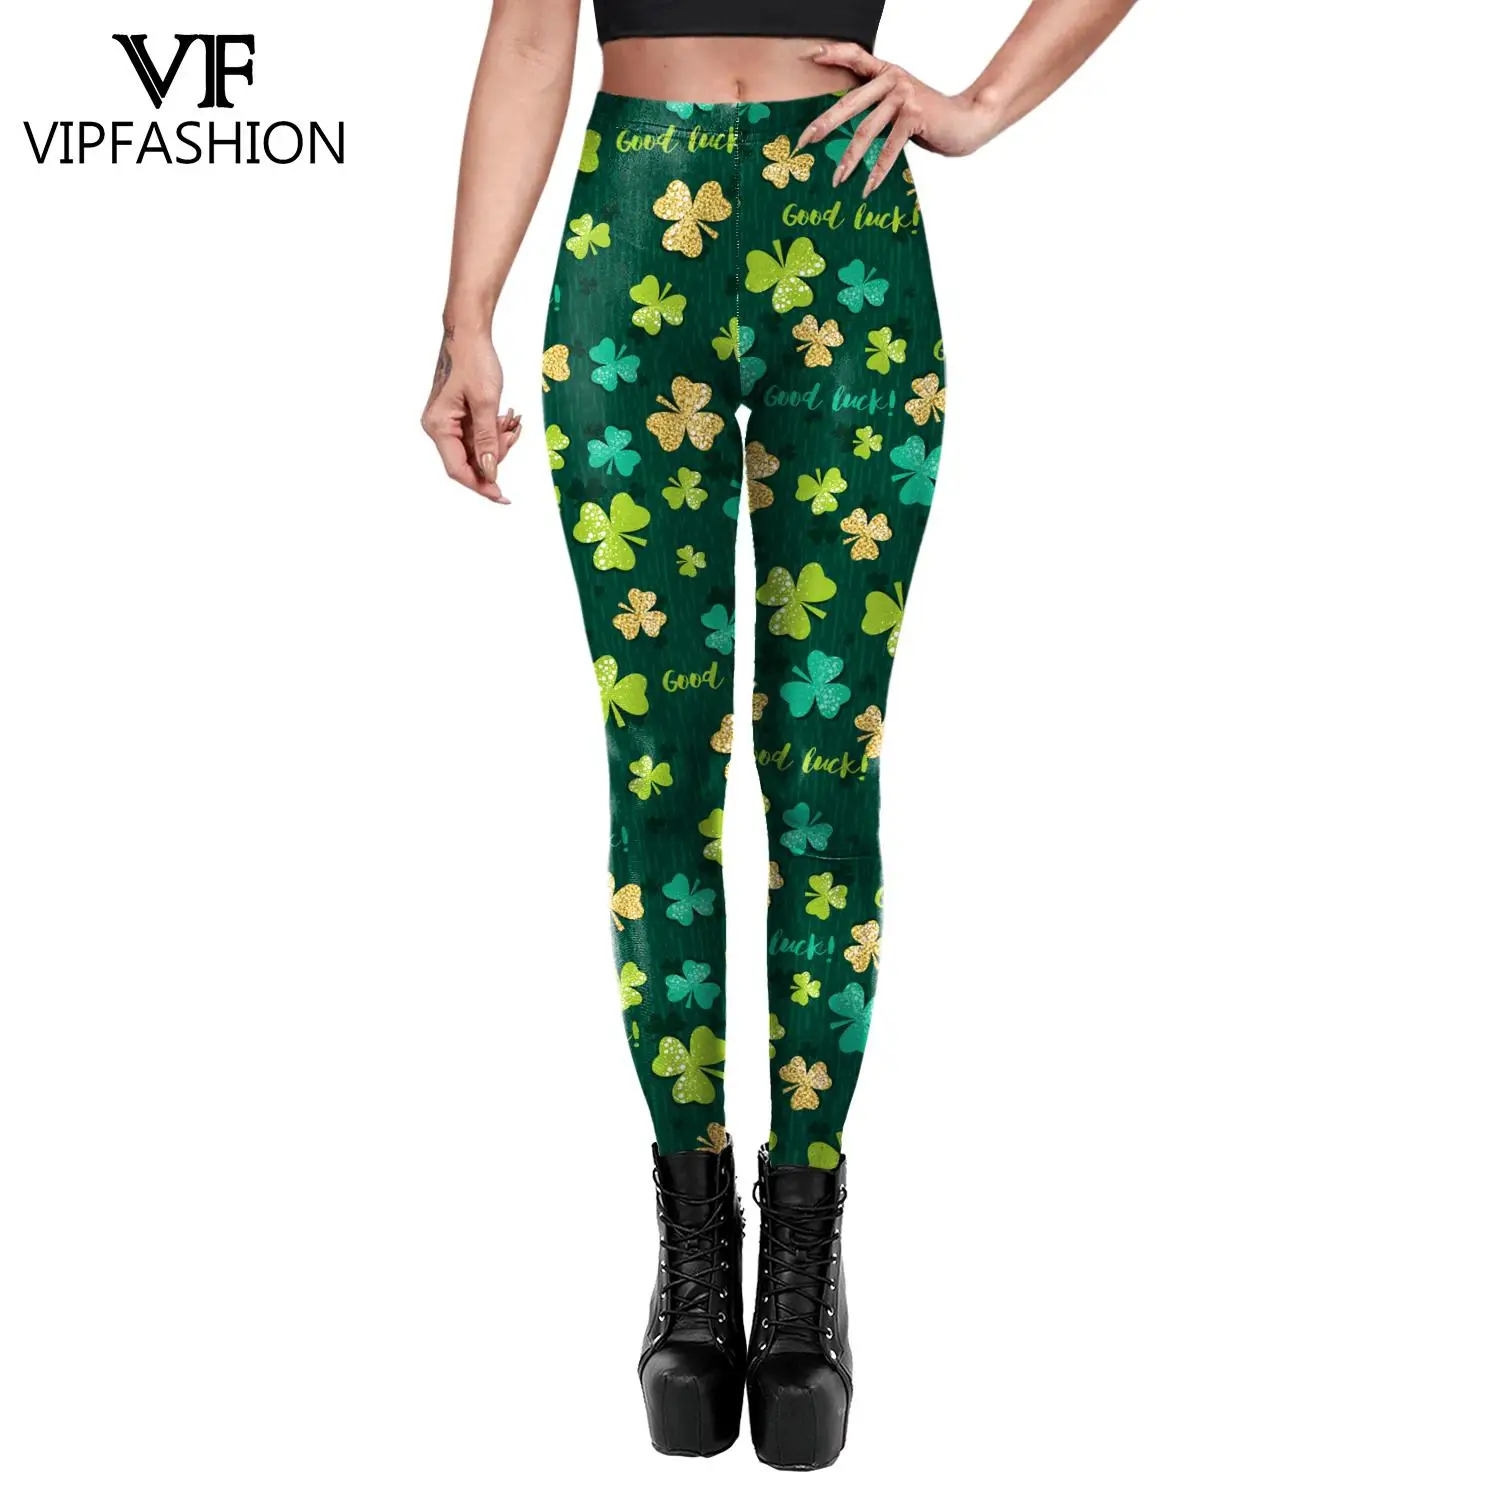 

VIP FASHION St. Patrick's Day Leggings Four Leaf Clover Print Pants Holiday Party Streetwear Women Elastic Workout Bottom